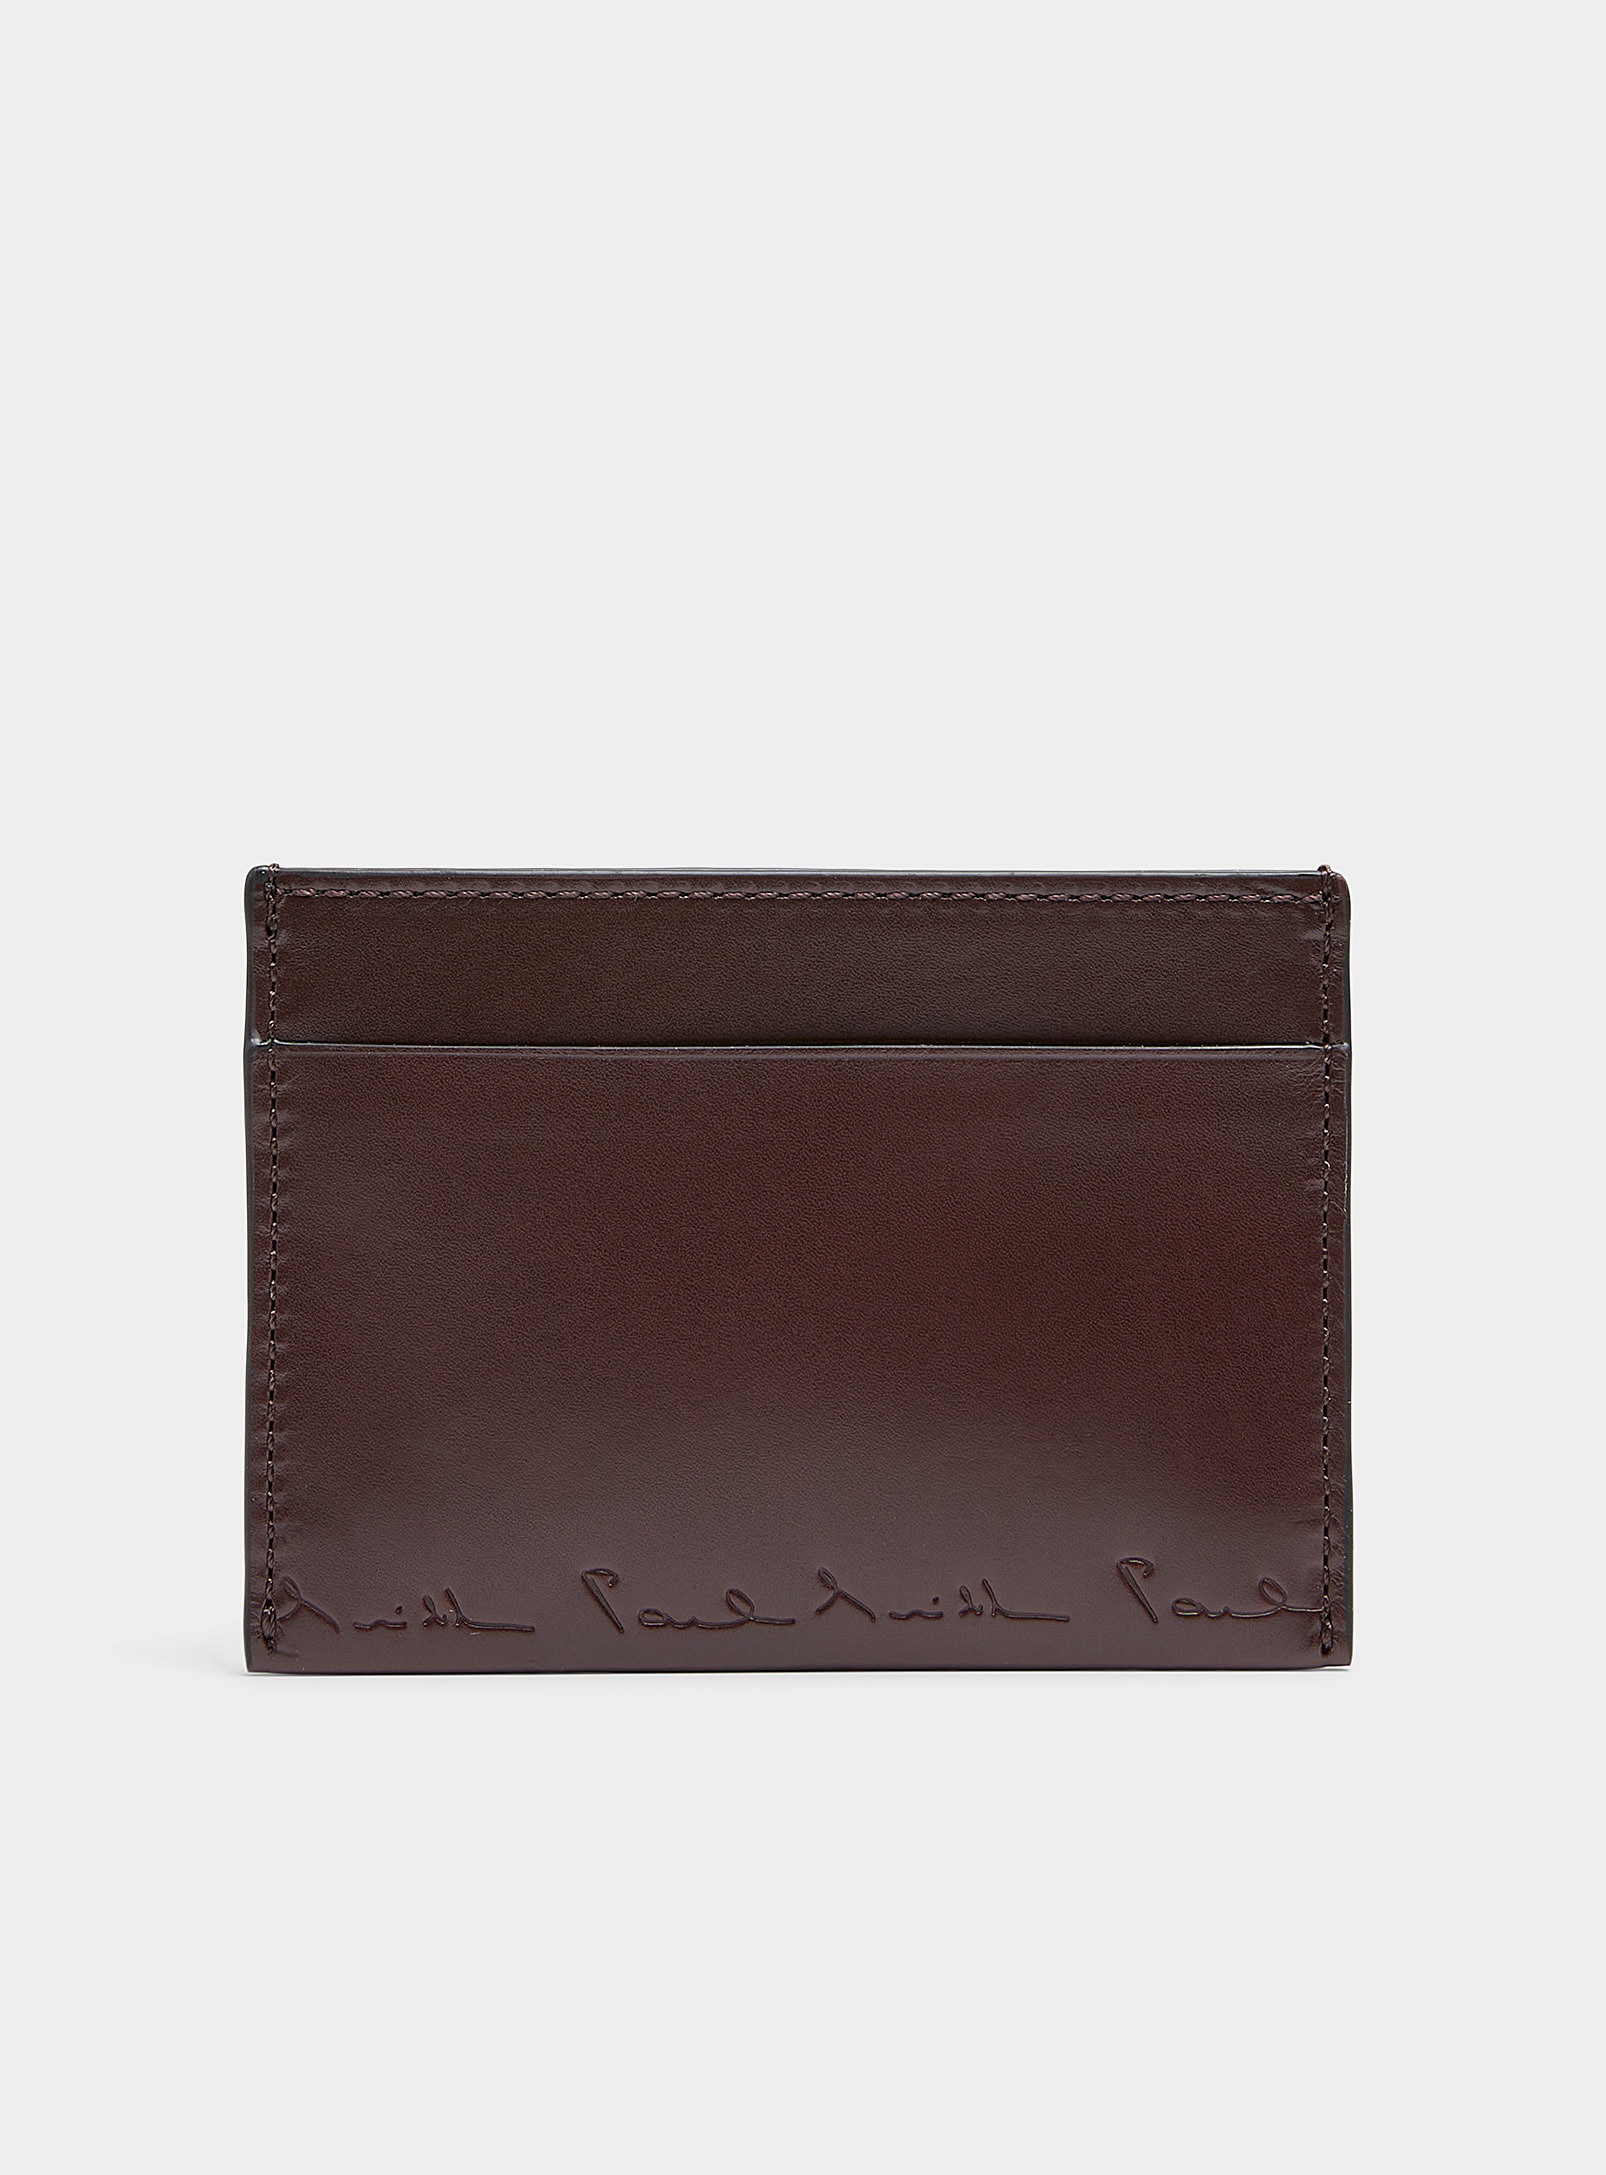 Paul Smith Brown Smooth Leather Card Holder